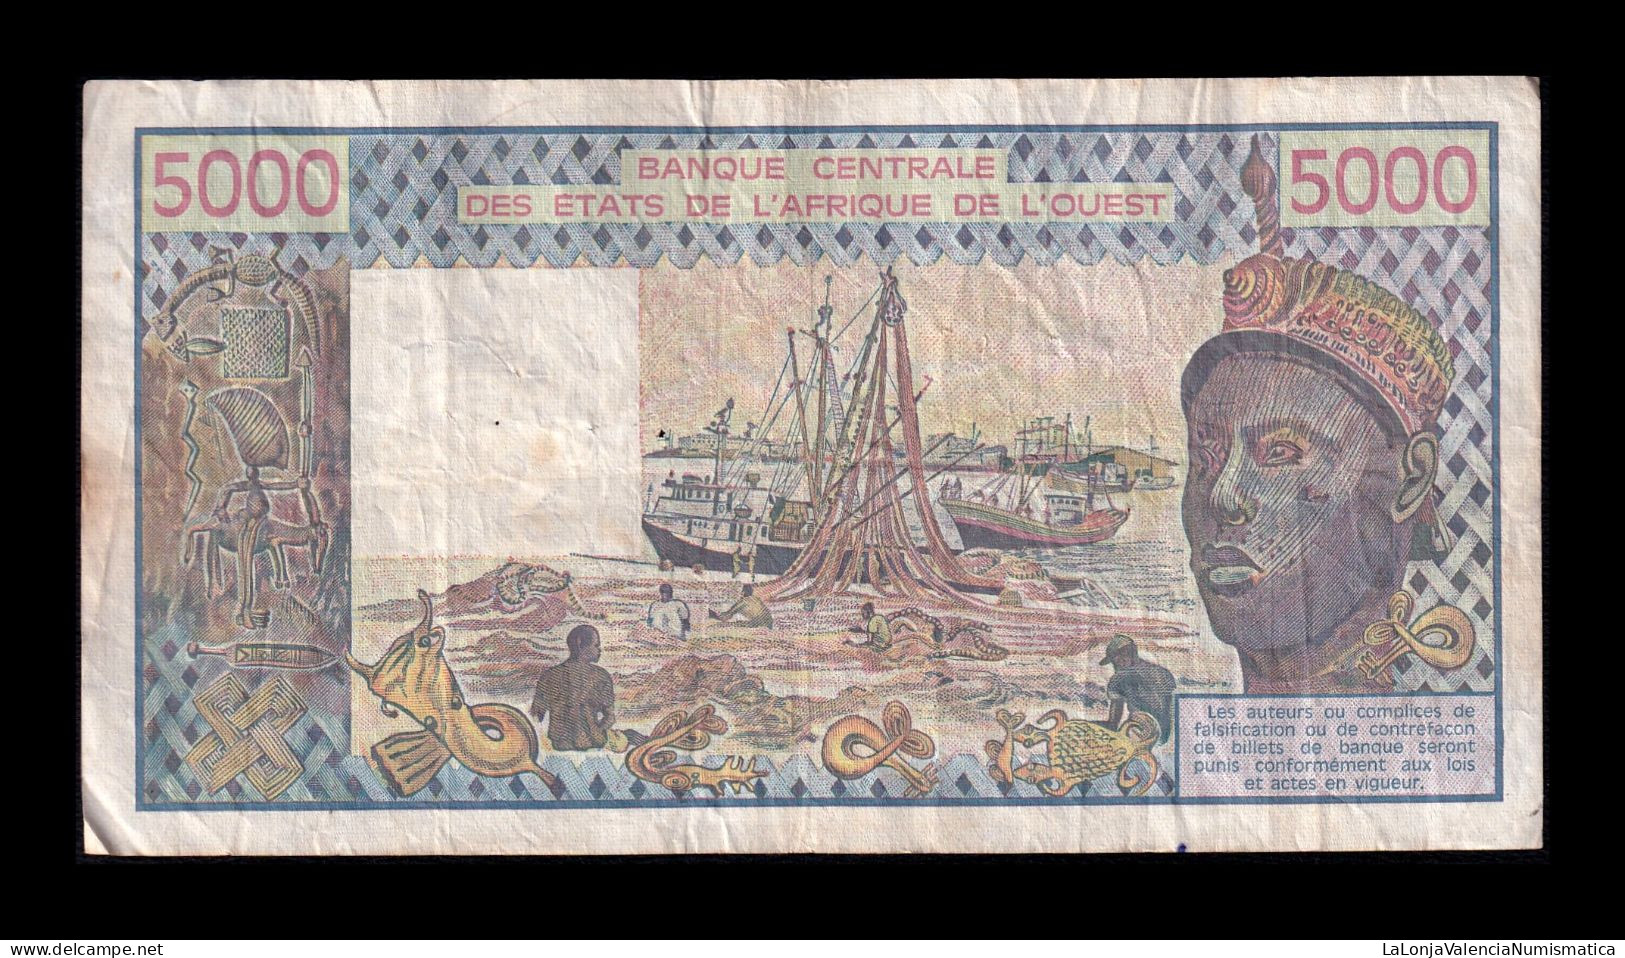 West African St. Senegal 5000 Francs 1992 Pick 708Kq Bc/Mbc F/Vf - West African States